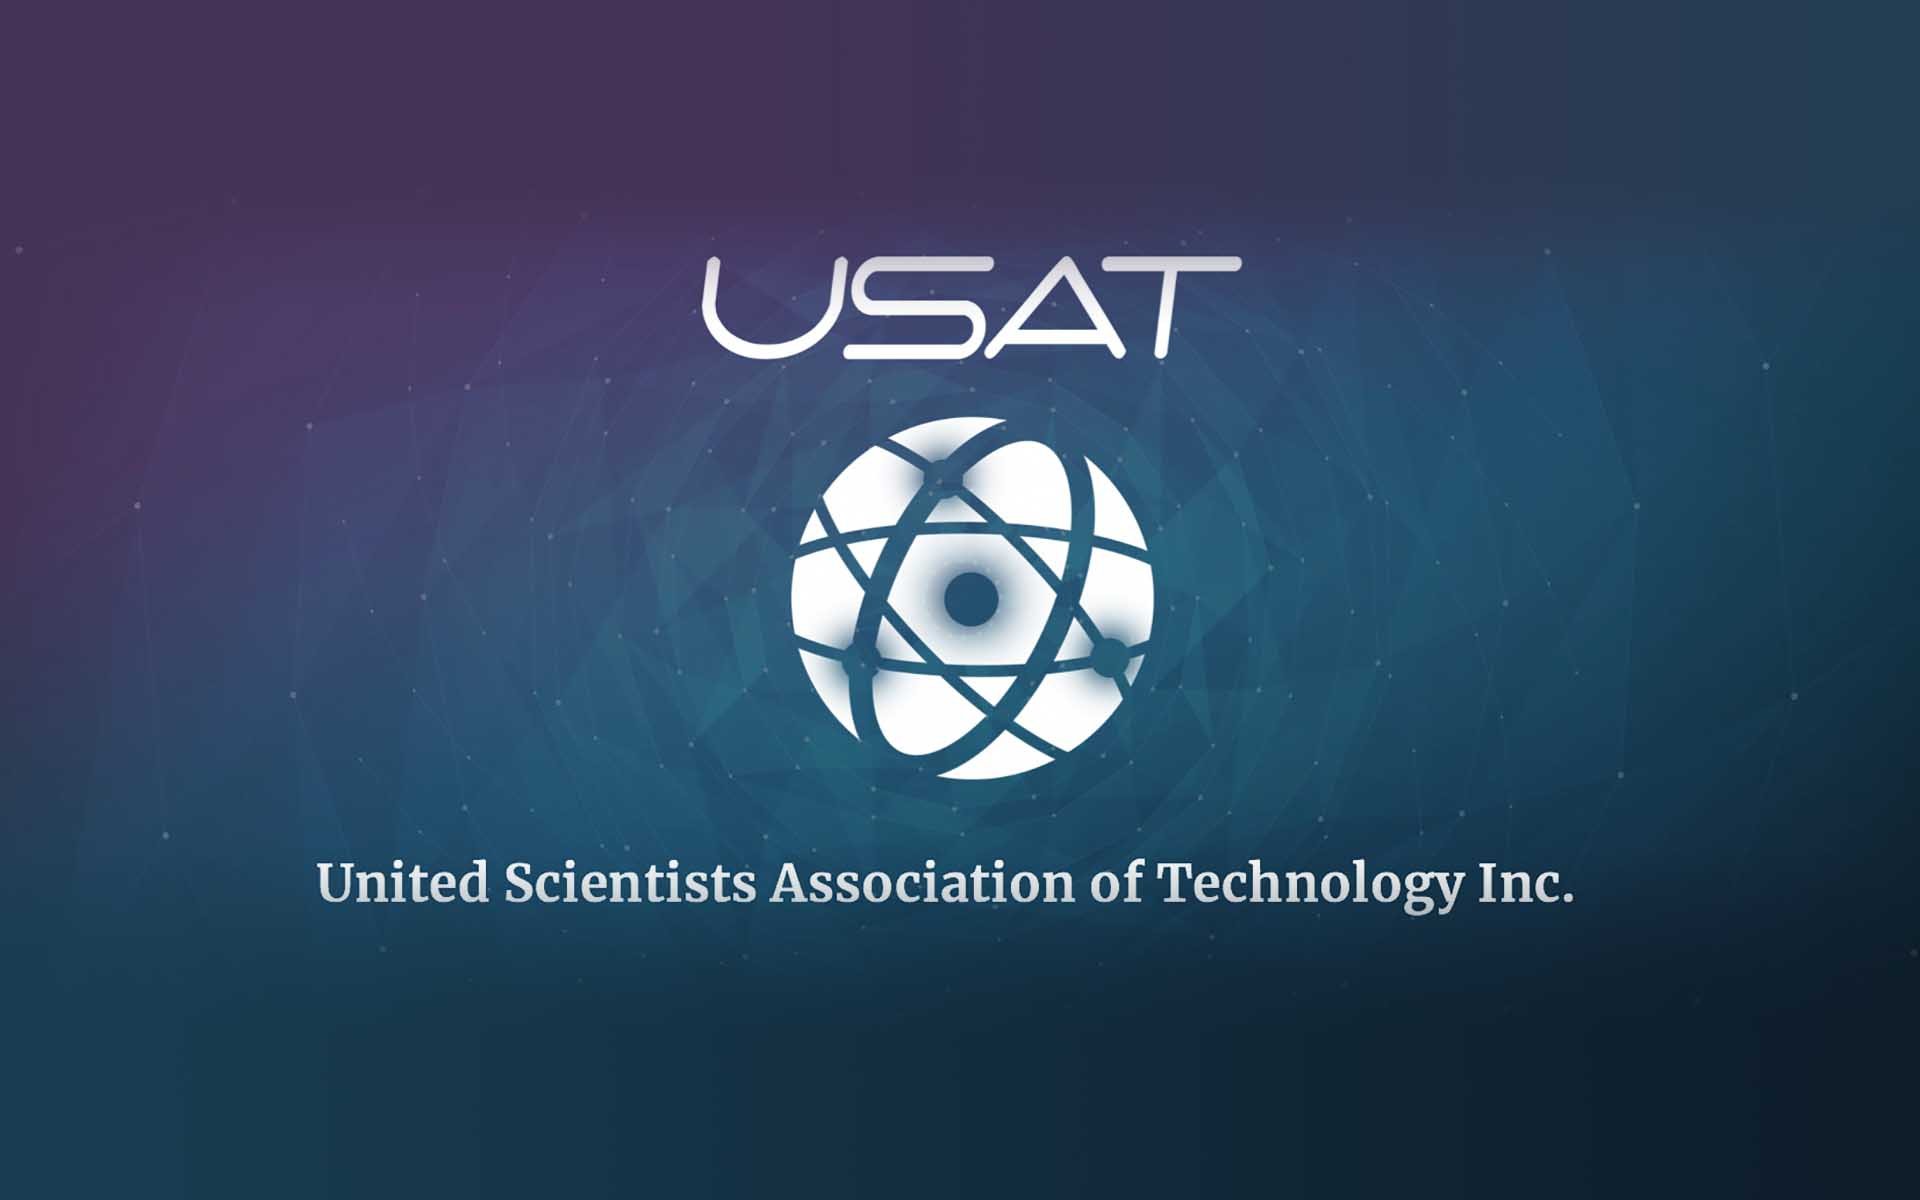 50% Bonus on USAT Token Purchases Until 31st March, 2018; USAT Inc. Uses Blockchain to Help Inventors Patent, Protect, and Develop Their IP